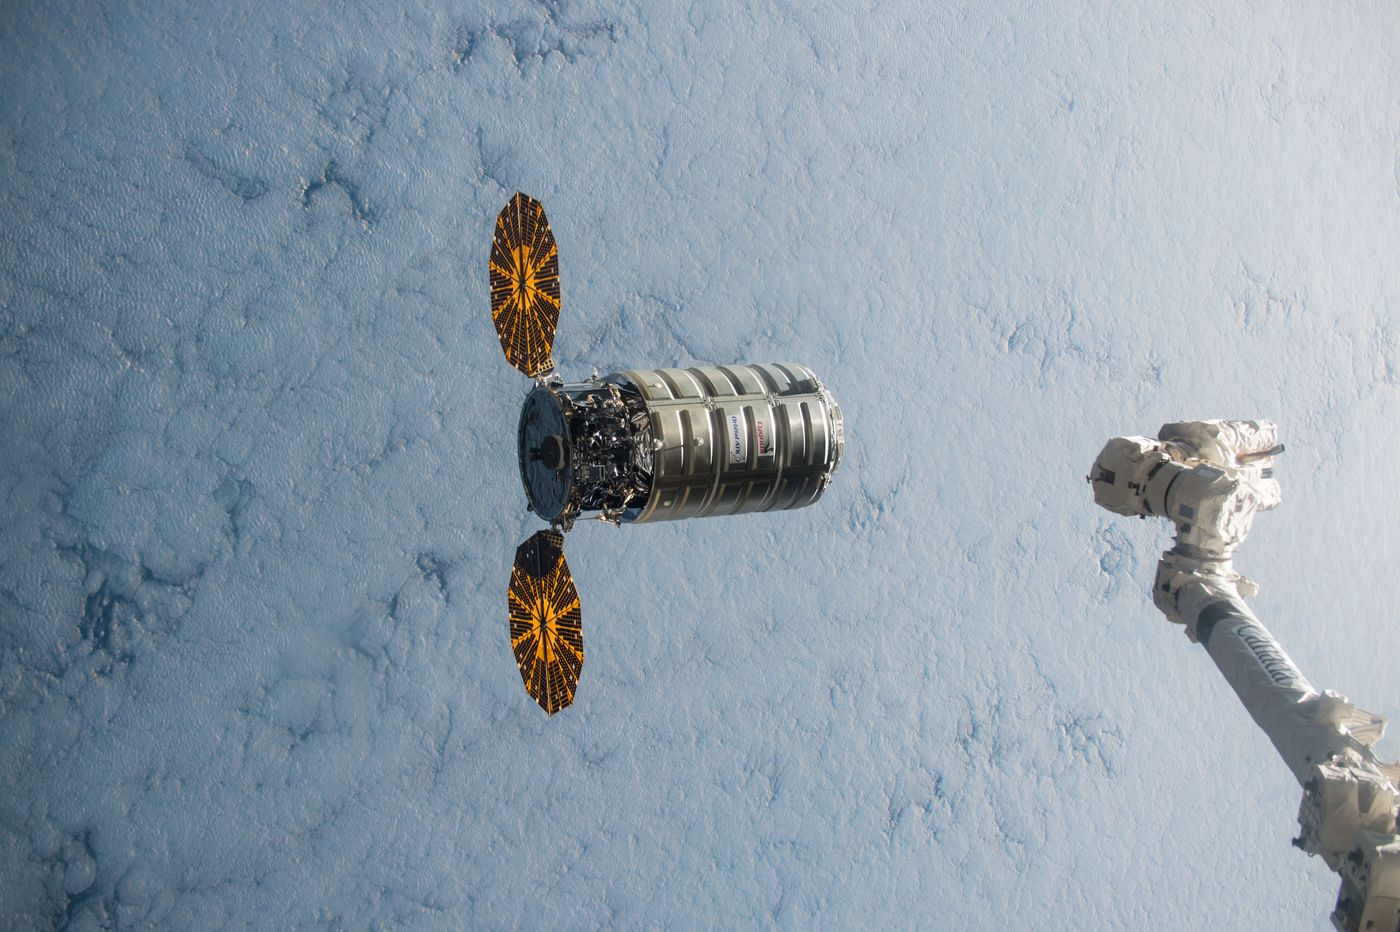 The Cygnus spacecraft NASA will be using for the experimentation.